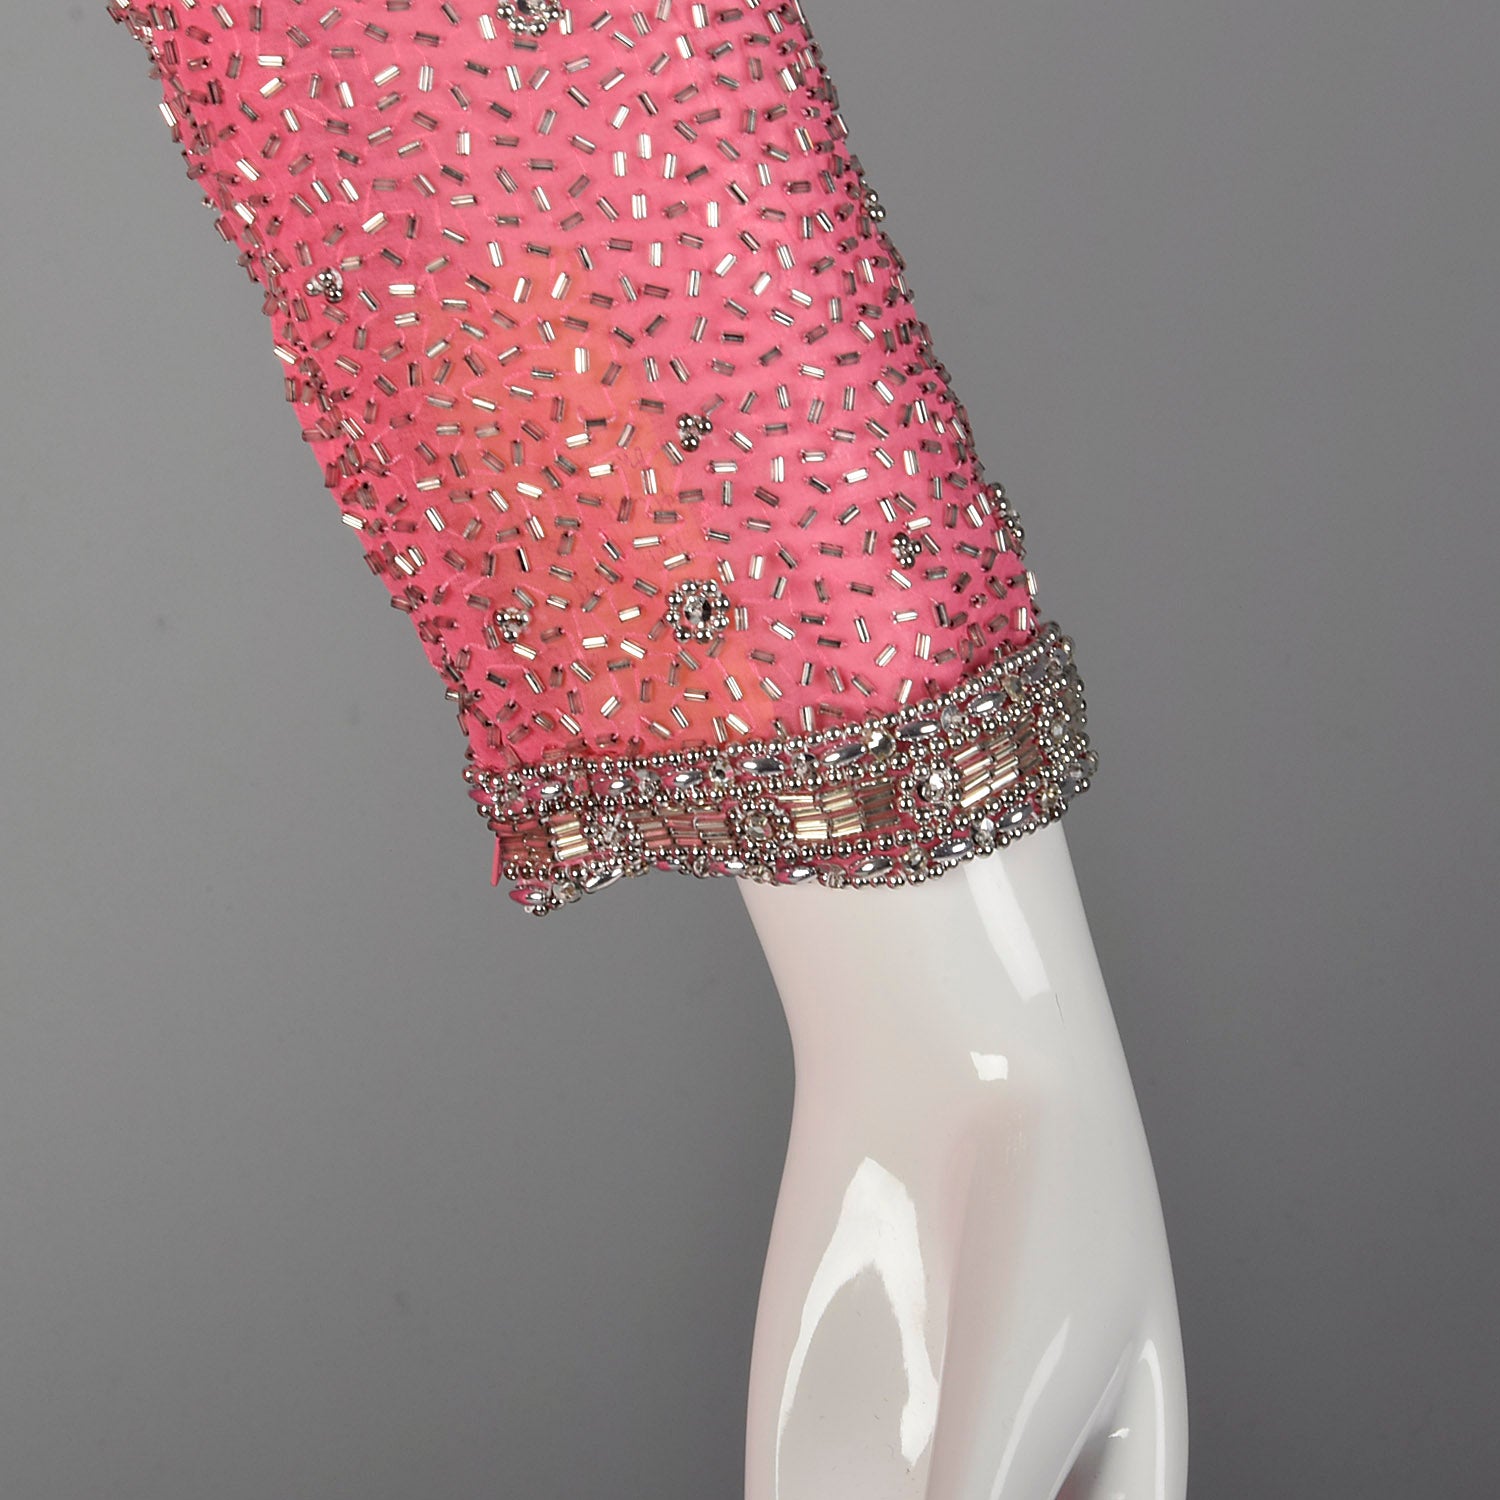 Large 1970s Pink Beaded Formal Dress